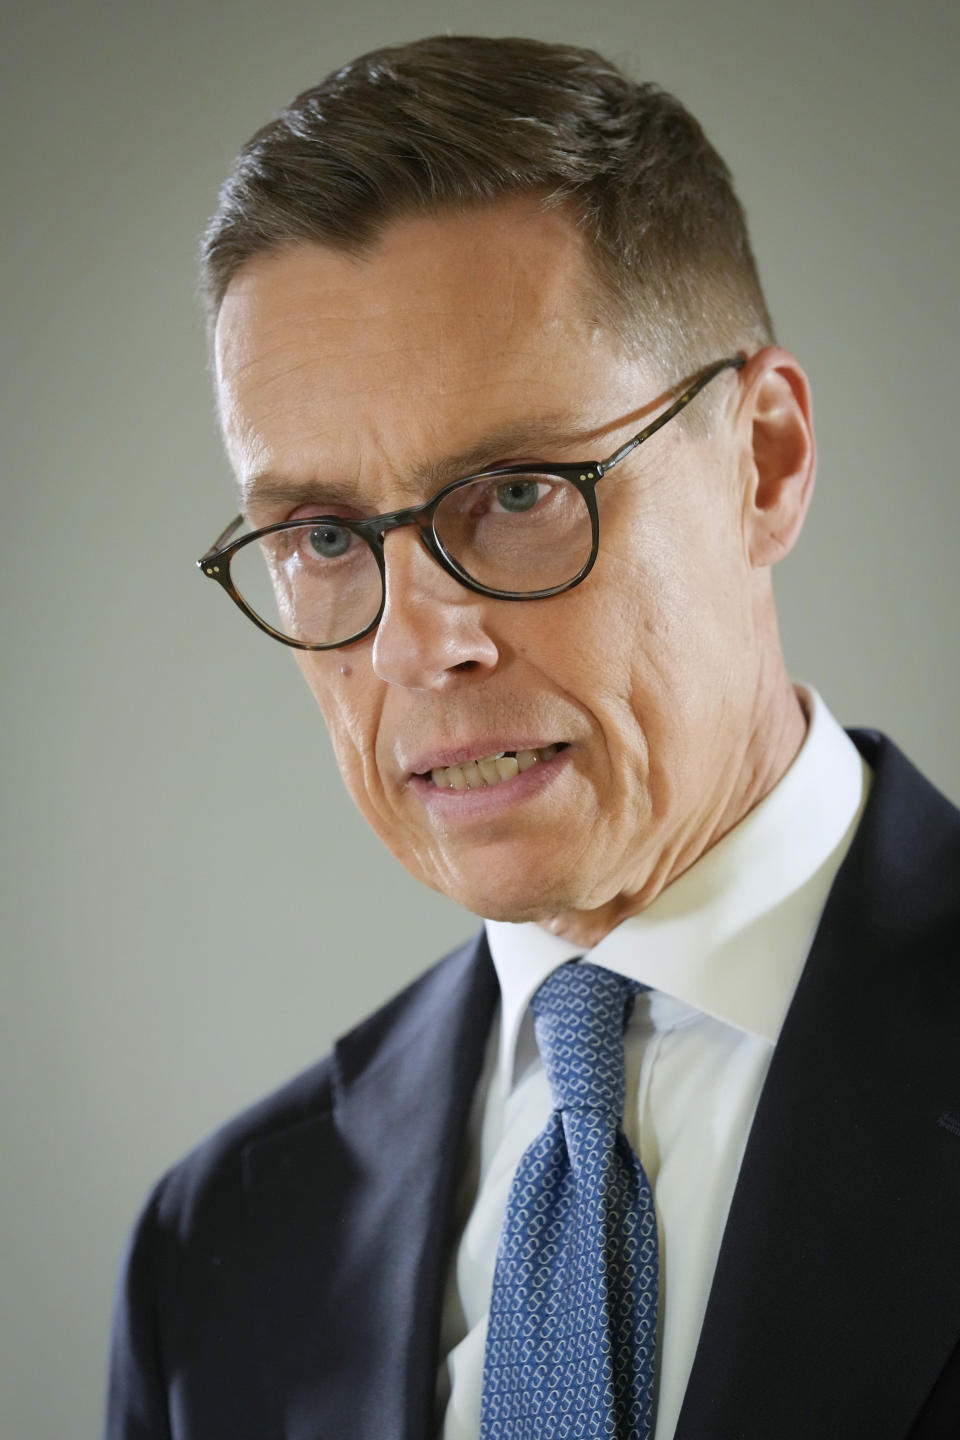 National Coalition Party candidate Alexander Stubb speaks to the media during a Presidential election event, at the Helsinki City Hall, in Helsinki, Sunday, Feb. 11, 2024. Ex-Prime Minister Stubb has narrowly won Finland's presidential election runoff on Sunday against former Foreign Minister Pekka Haavisto. (AP Photo/Sergei Grits)